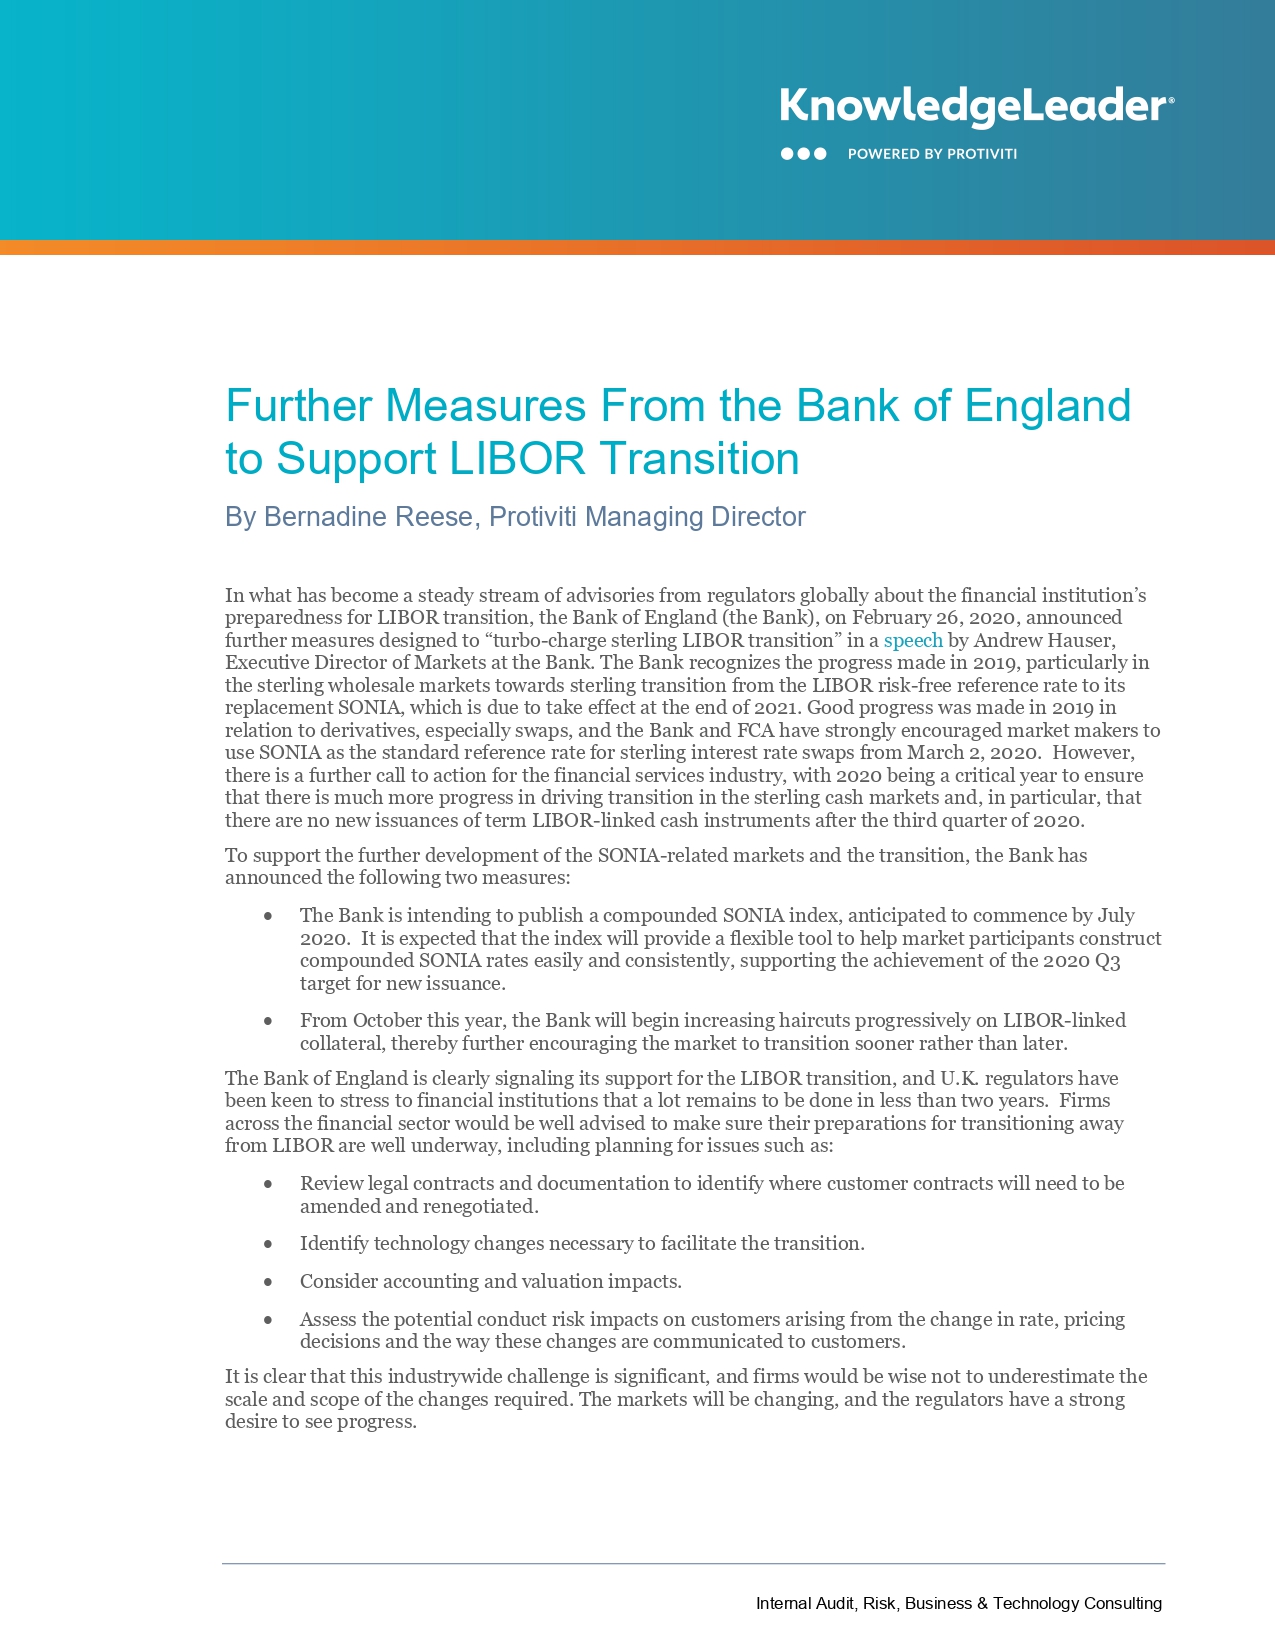 Further Measures From the Bank of England to Support LIBOR Transition